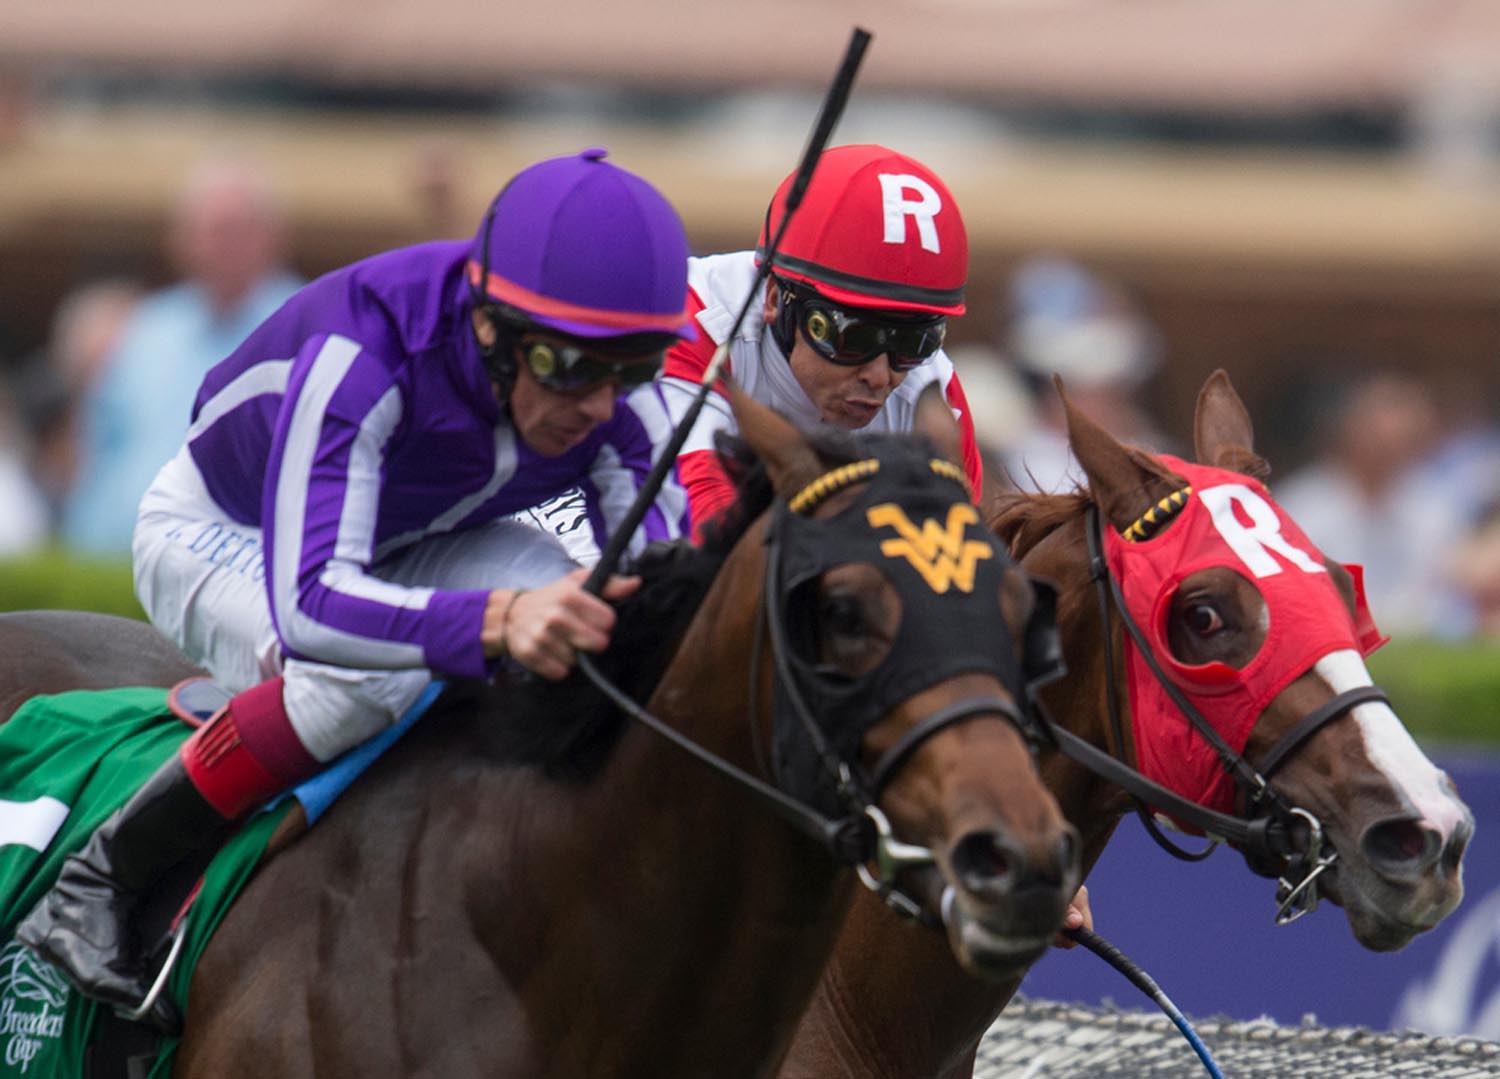  Heading to the finish line Mike Smith, right, pushes Luck of the Kitten against Hootenanny with Lanfranco Doyle during the Breeders' Cup Juvenile Turf 6th race of the Breeders Cup World Championships at Santa Anita Park in Arcadia on Friday. Hootena